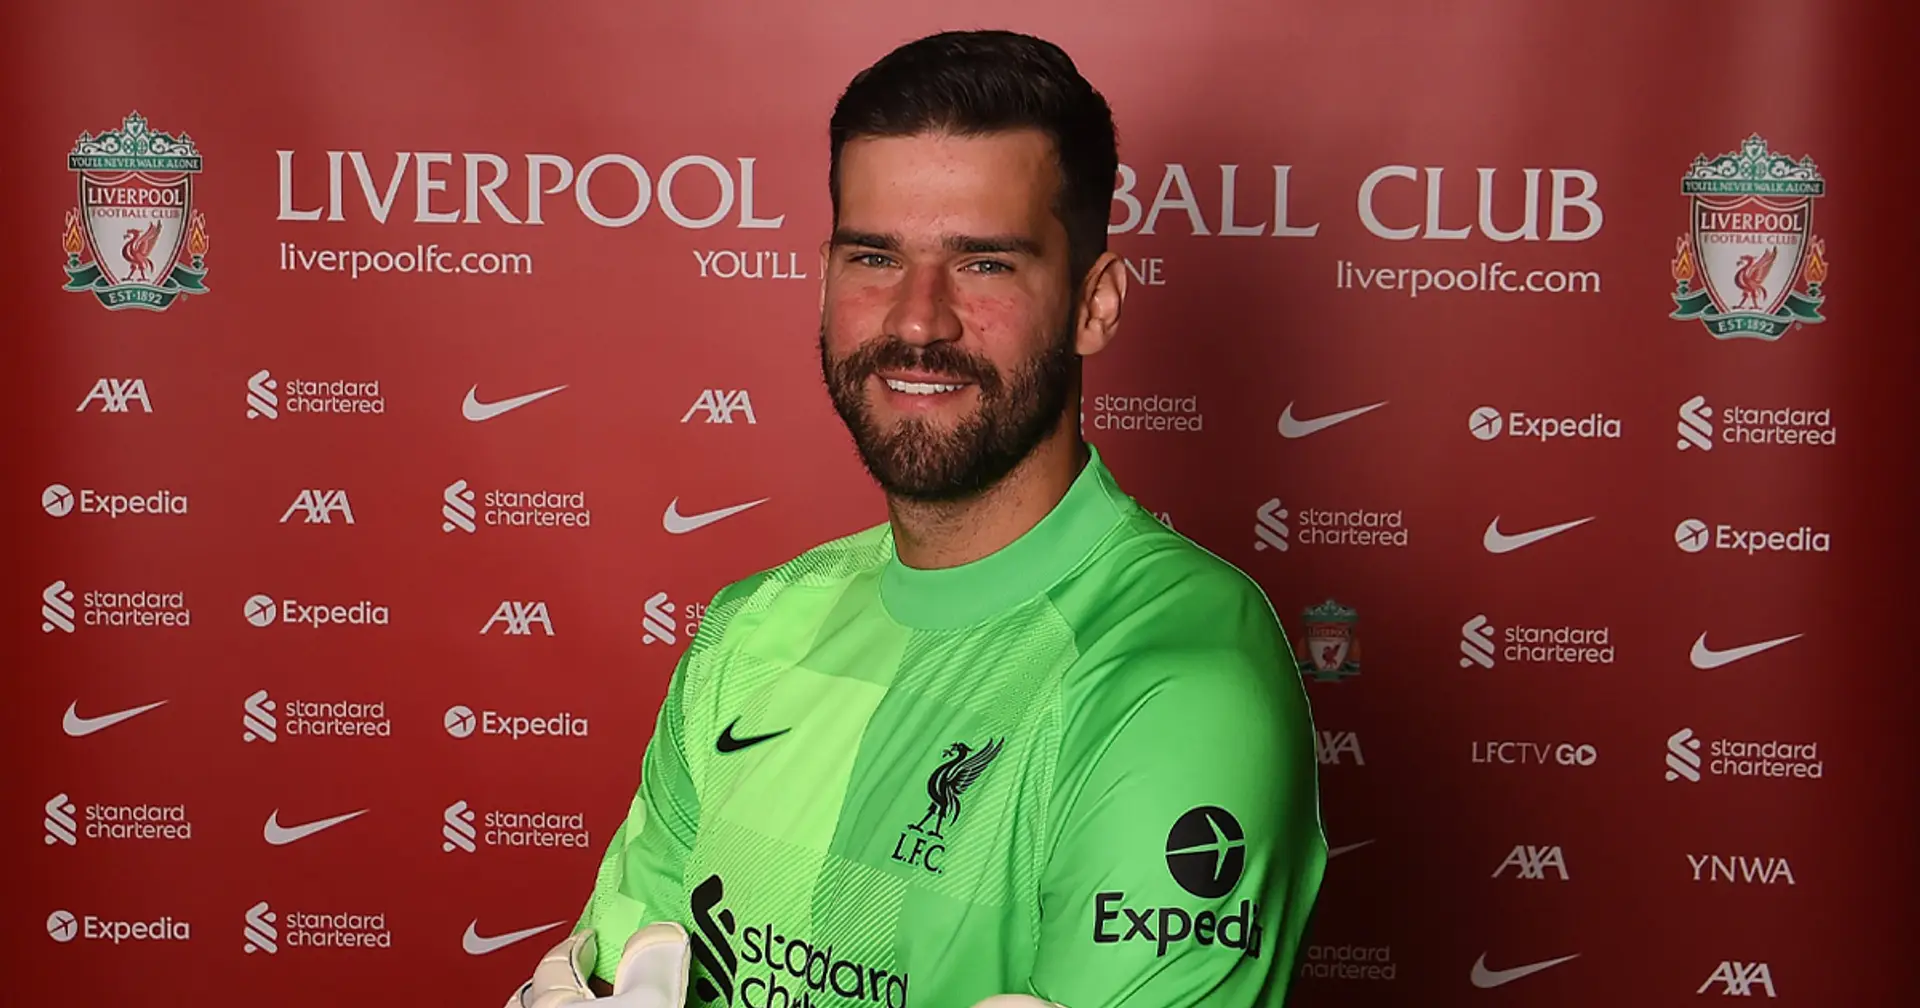 OFFICIAL: Alisson signs new long-term contract